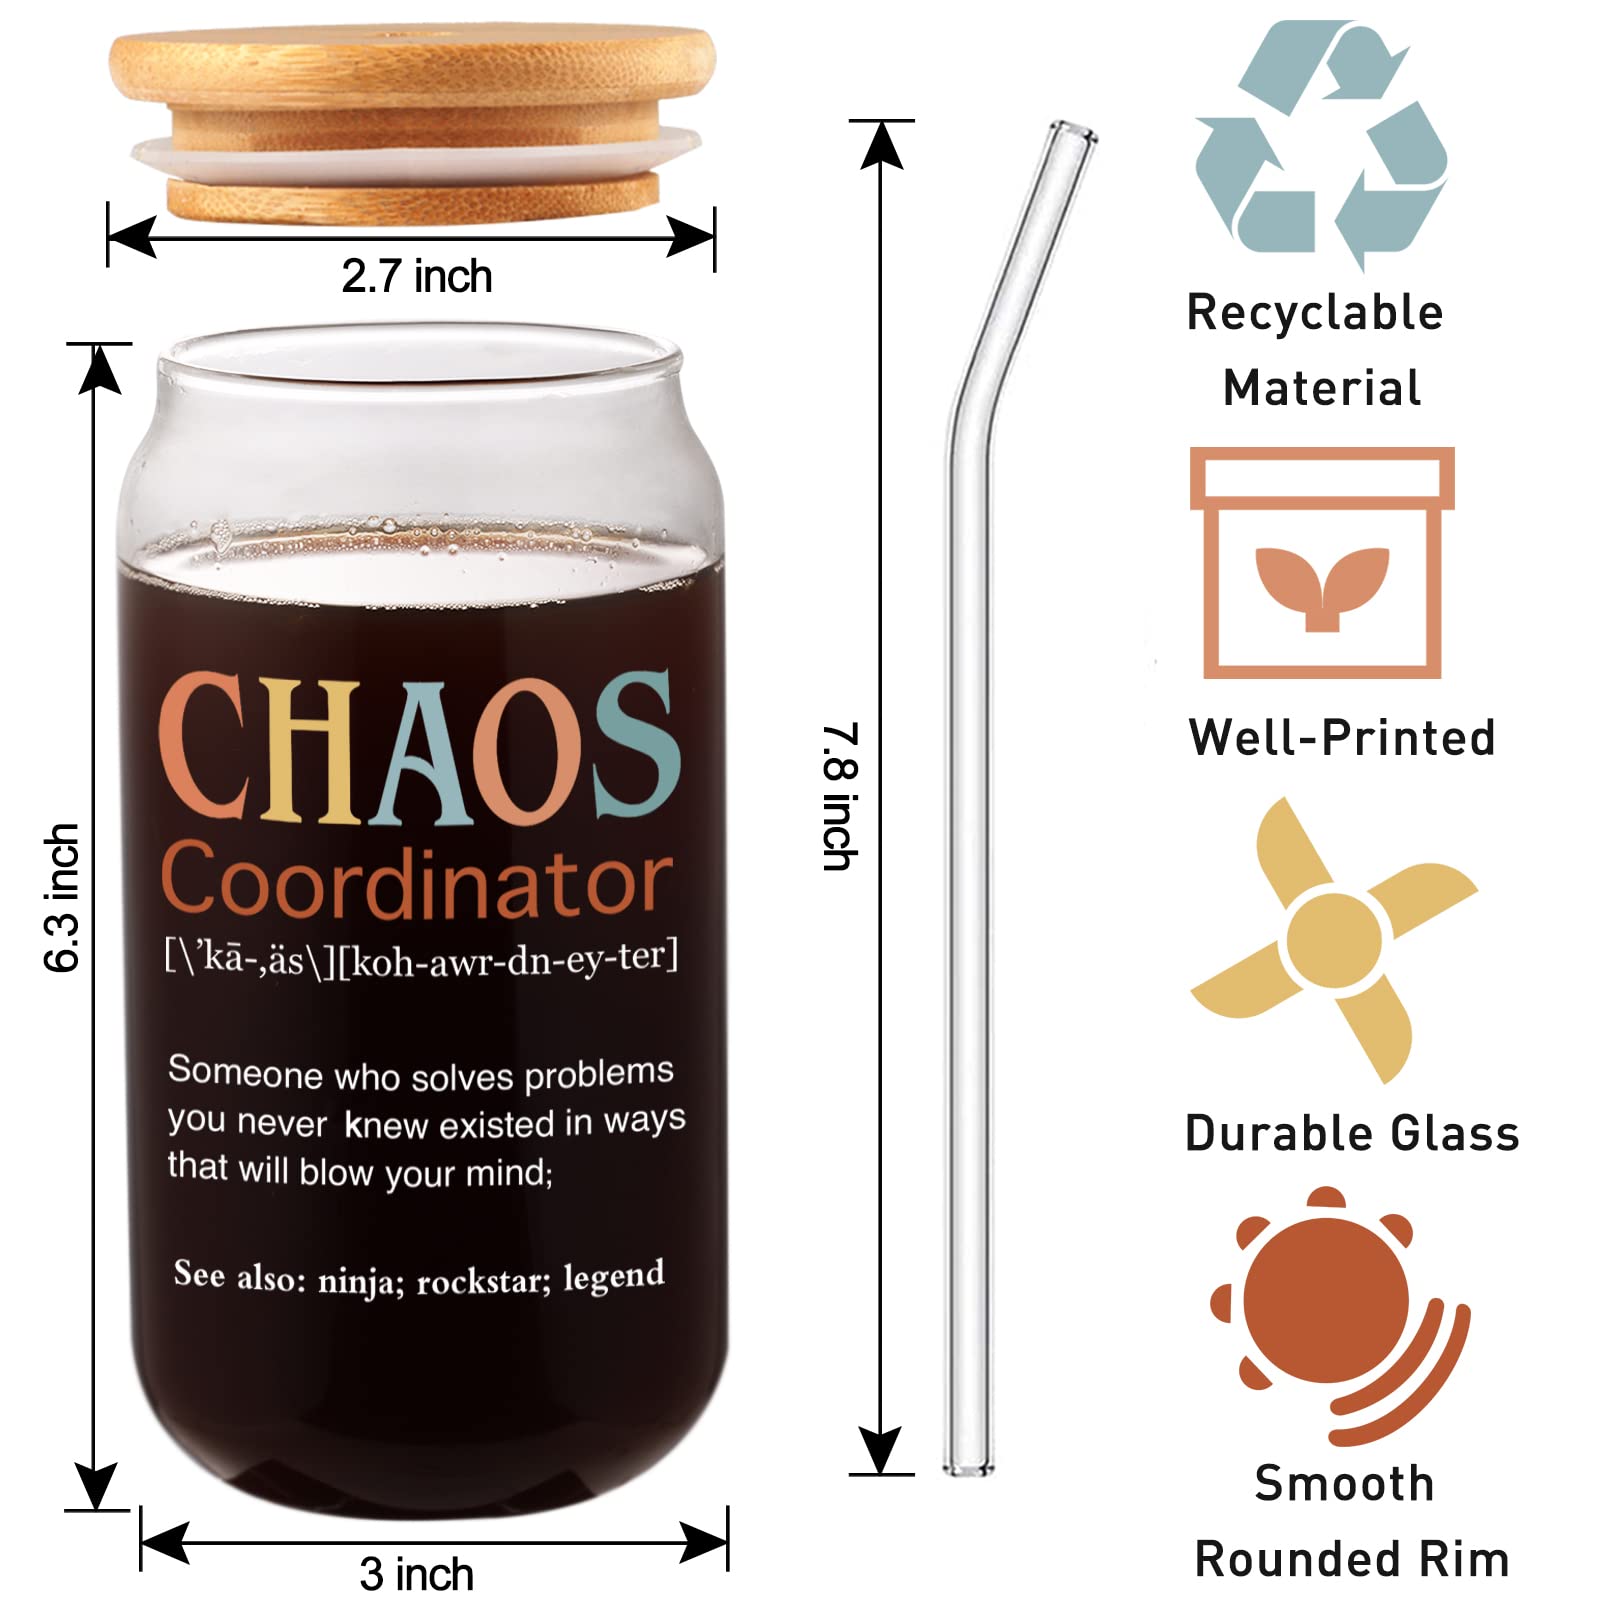 Chaos Coordinator Gifts For Women - 16oz Chaos Coordinator Glass Cup With Lid And Straw - Drinking Glasses Tumbler Gifts For Her - Thank You Gift For Coworker, Teacher, Boss Lady